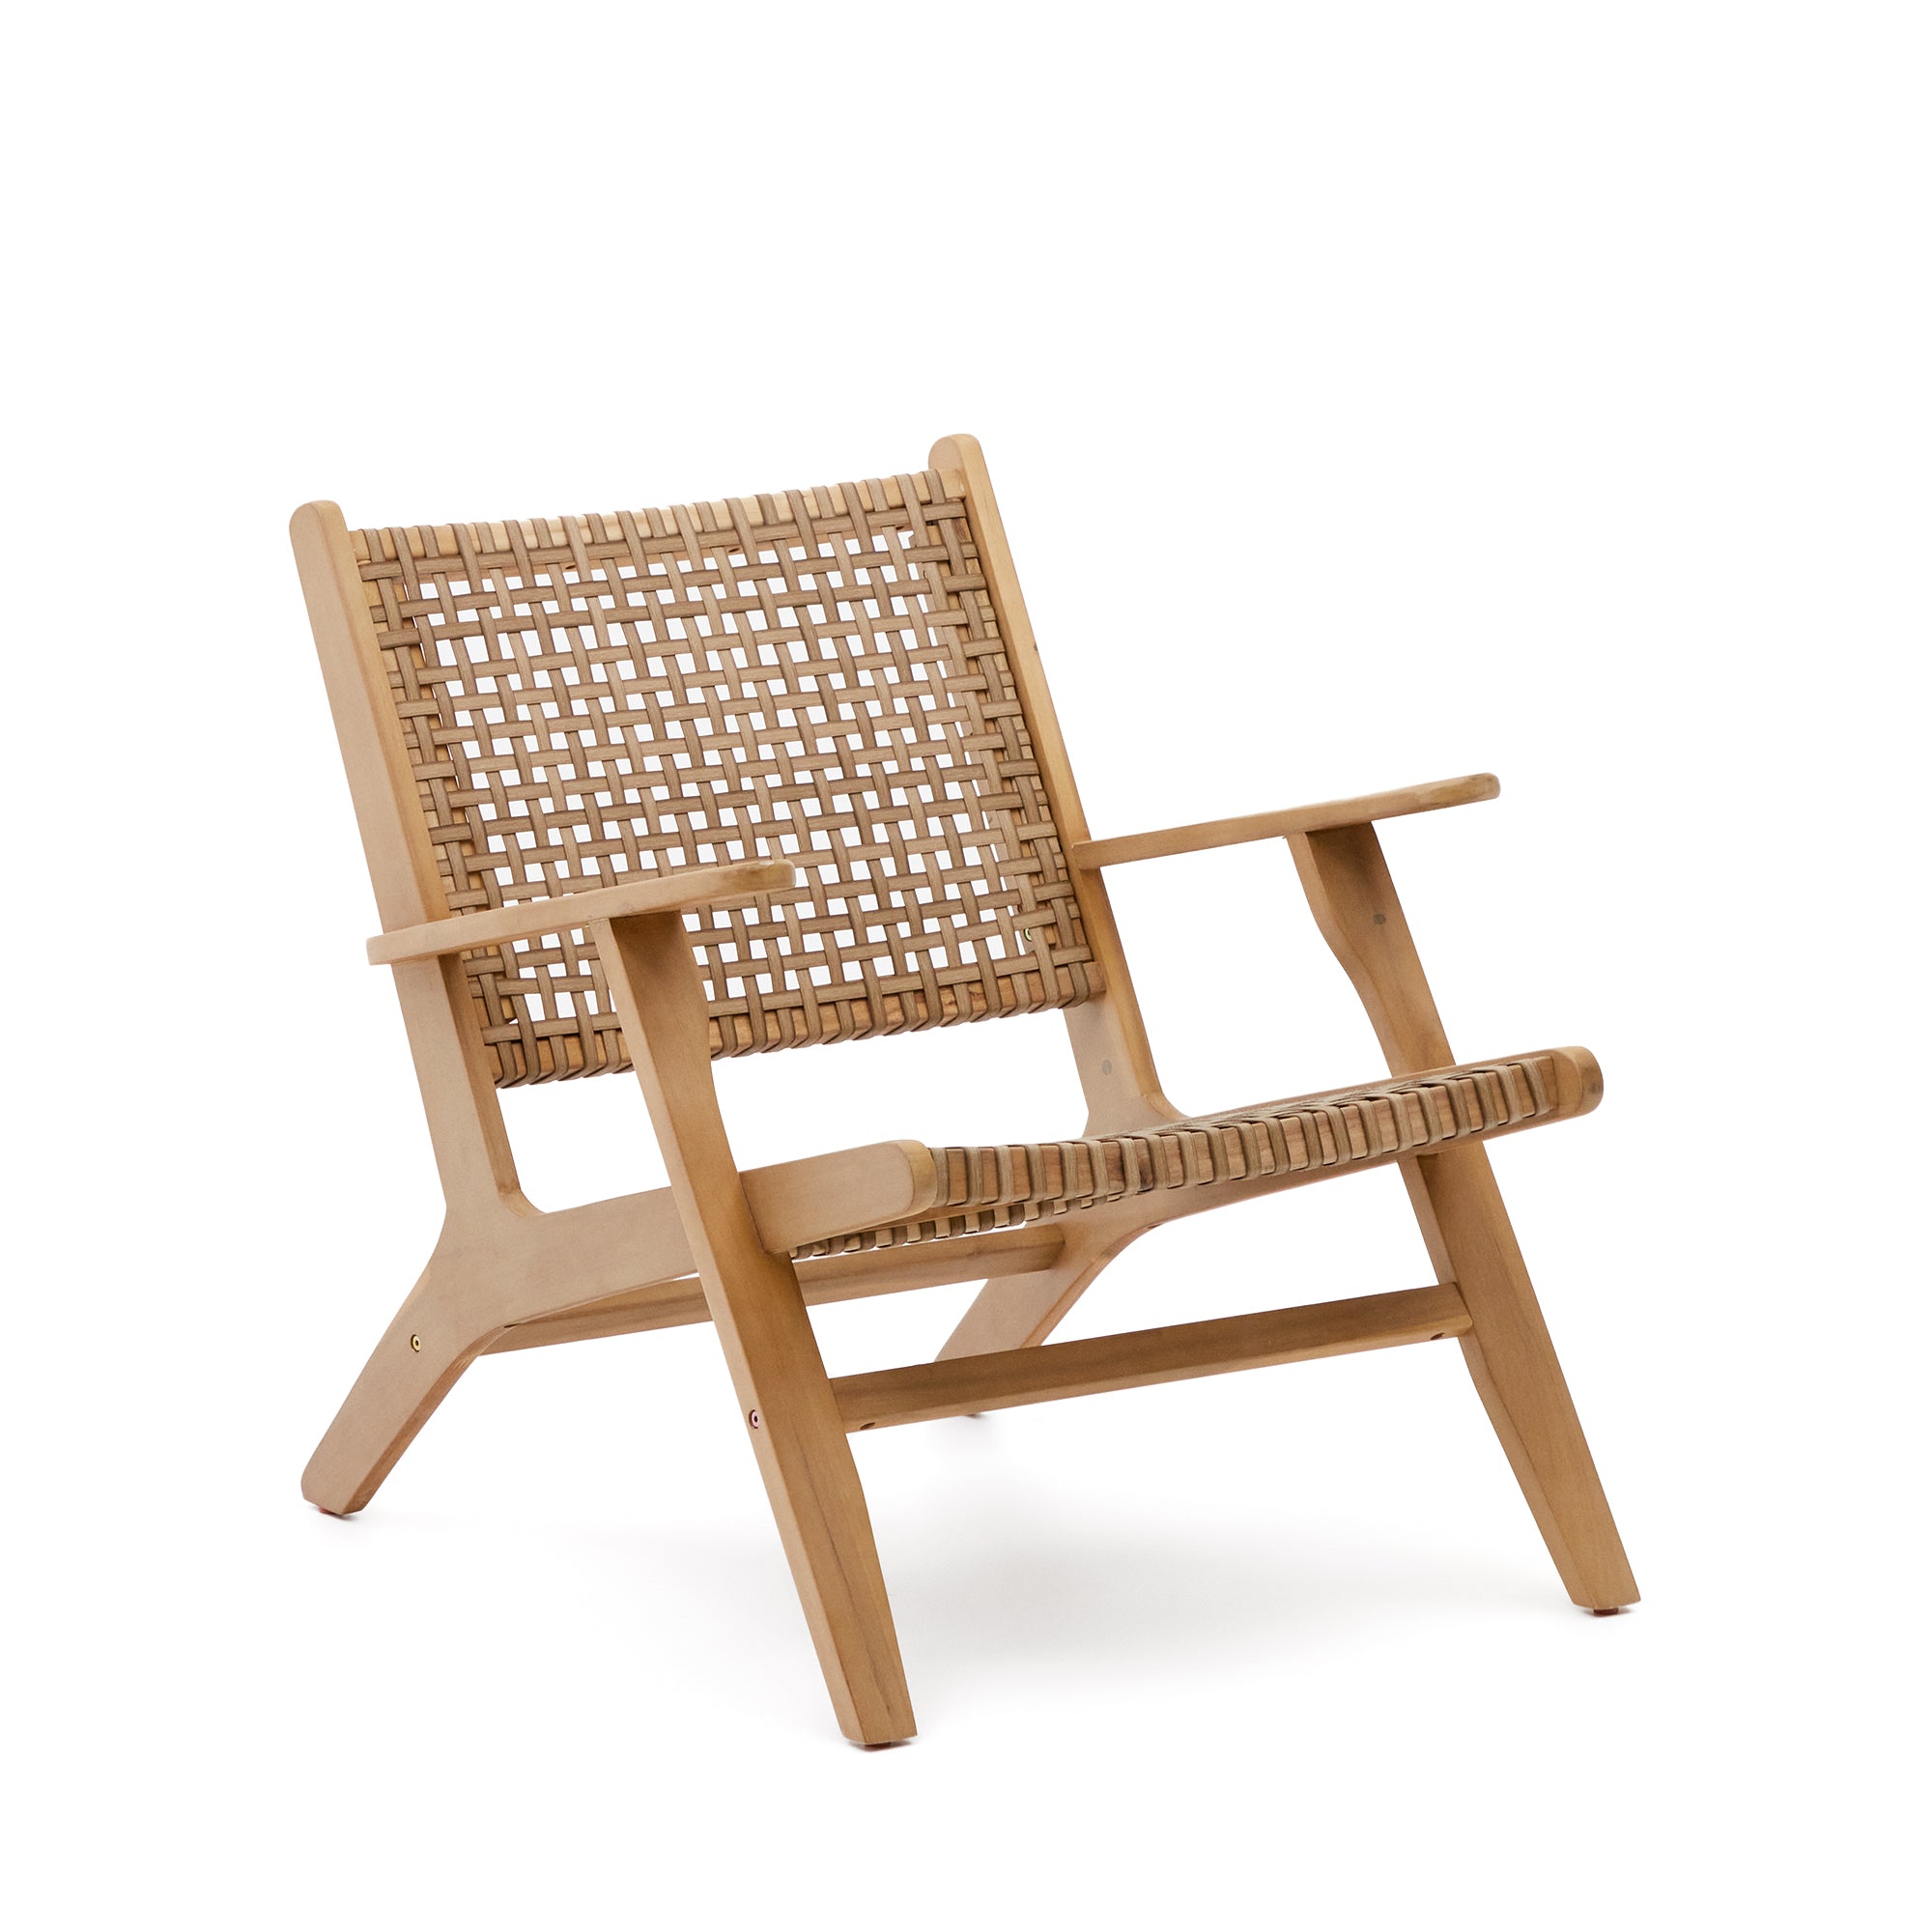 Grignoon chair, made from solid acacia wood and woven wicker FSC 100%